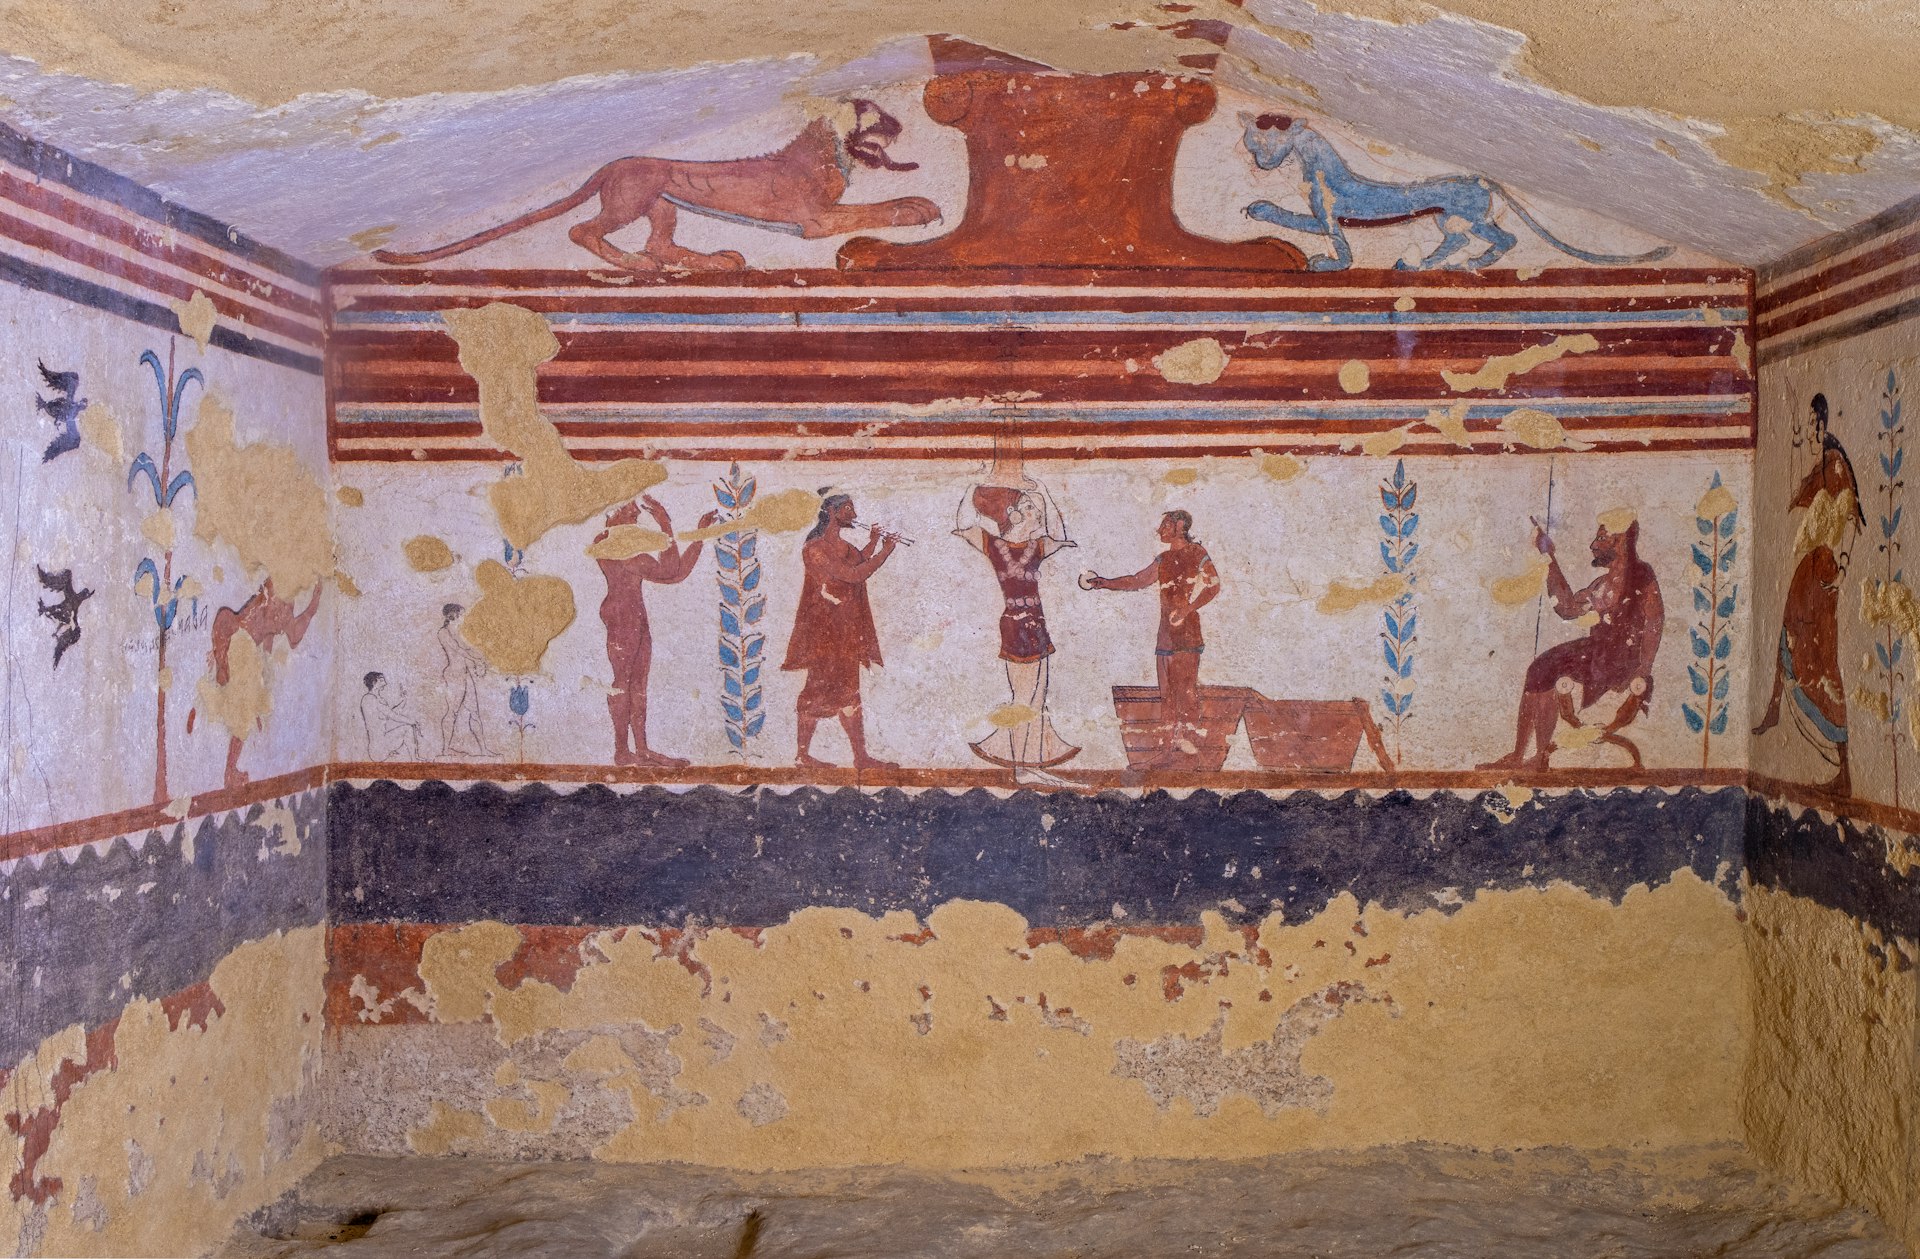 Red figures, blue and red animals and floral motifs in the painted funeral chambers at the ancient Etruscan tombs of Tarquinia